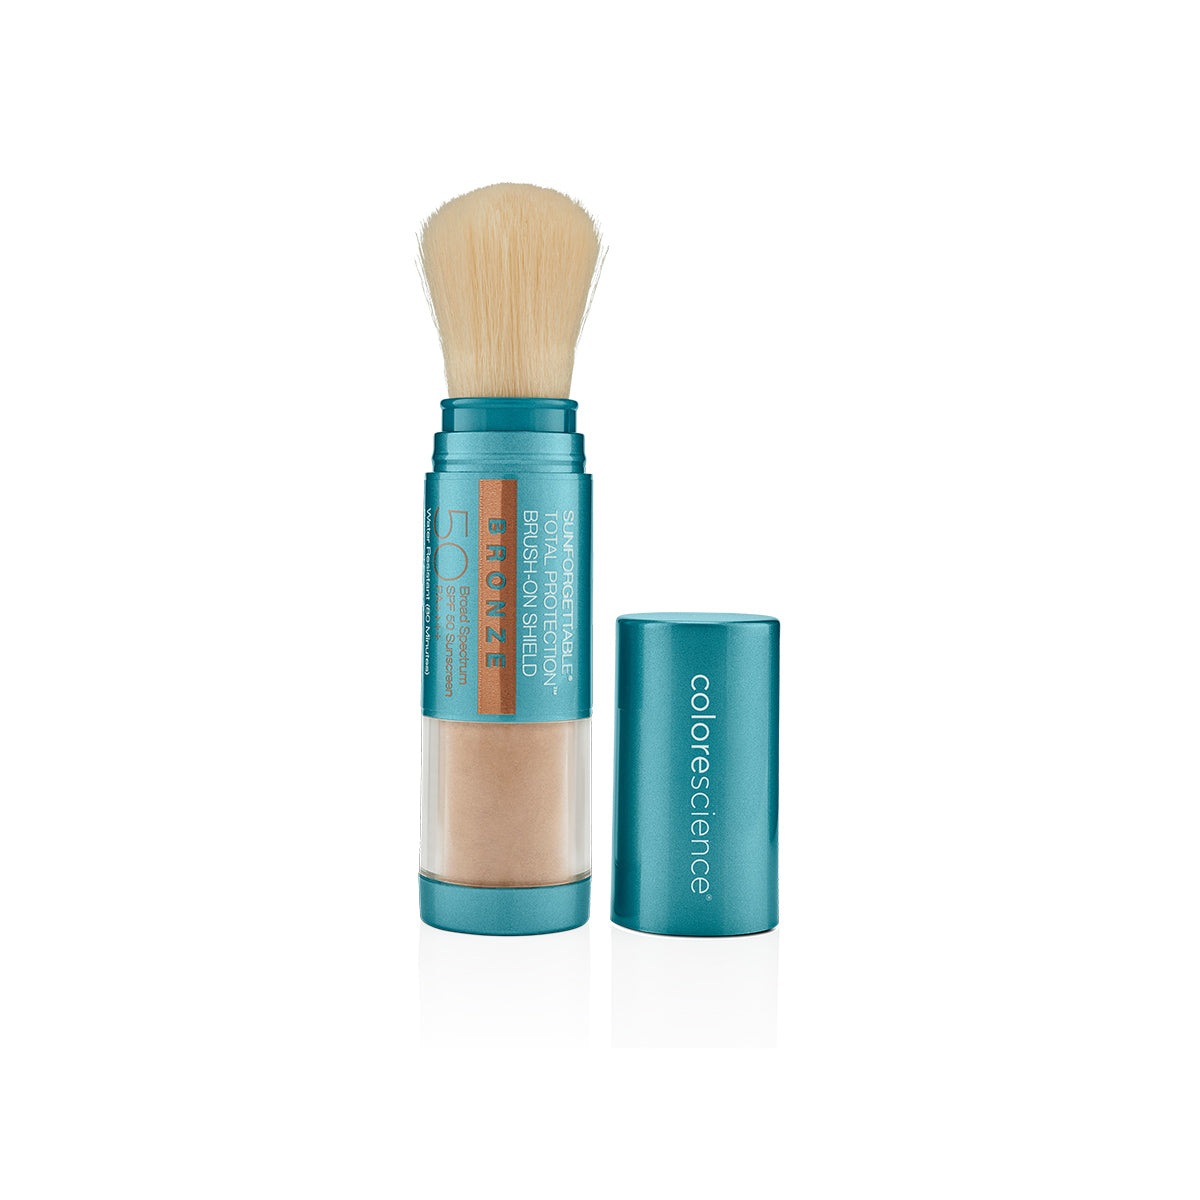 COLORSCIENCE SUNFORGETTABLE TOTAL PROTECTION BRONZE SPF 30 BROCHA PROTECTORA SOLAR | The Glow Shop